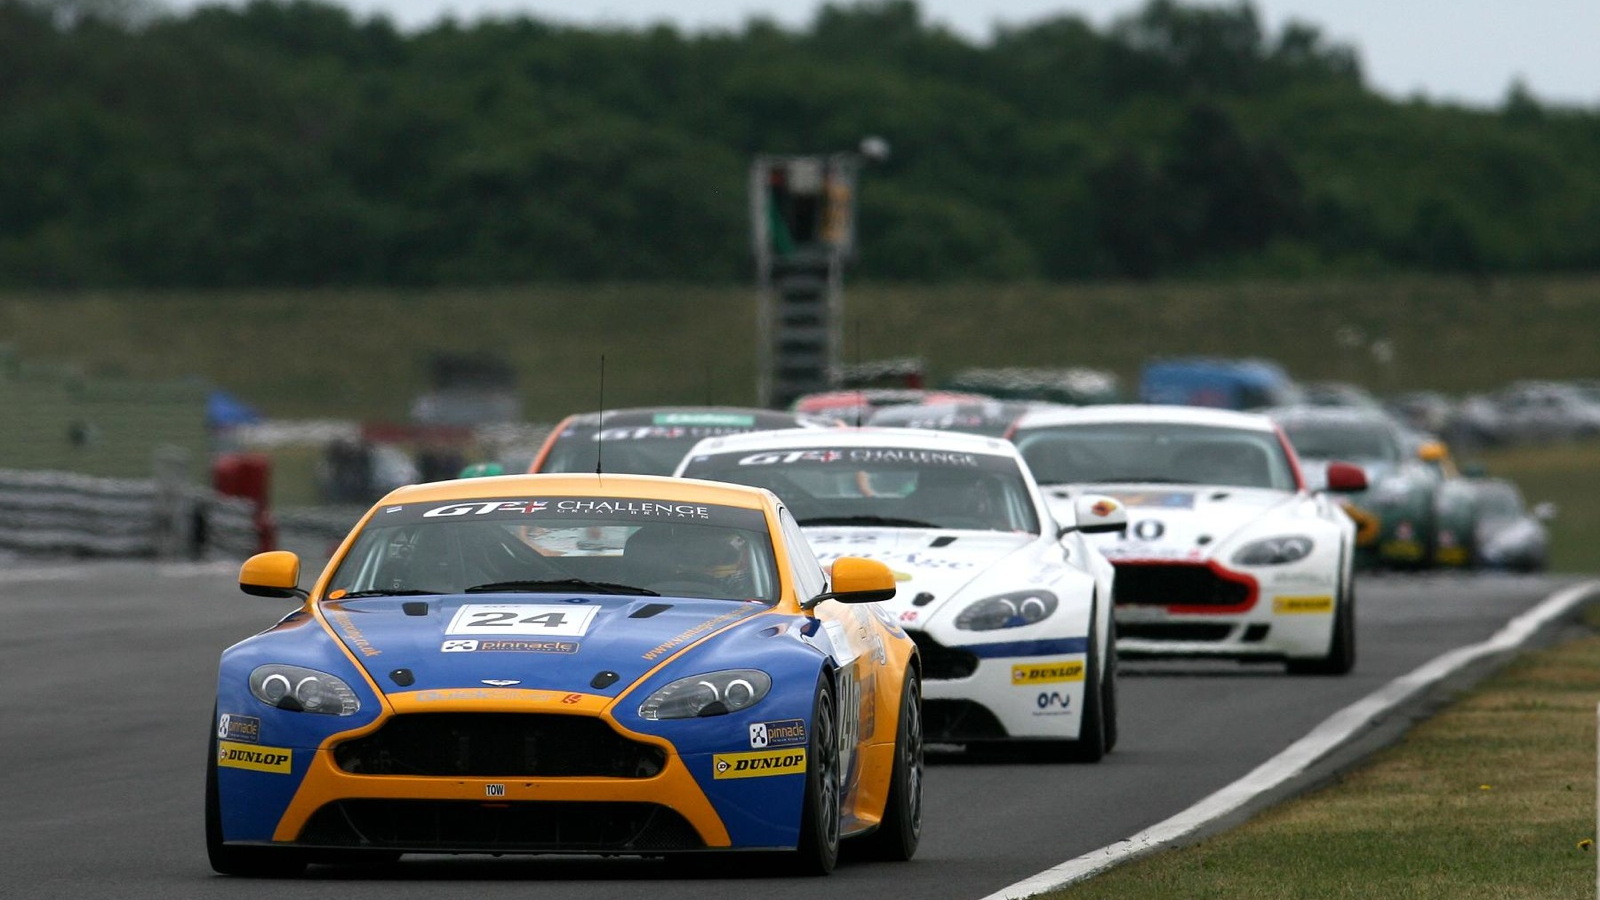 Entrants in the inaugural Aston Martin Racing Festival of Le Mans